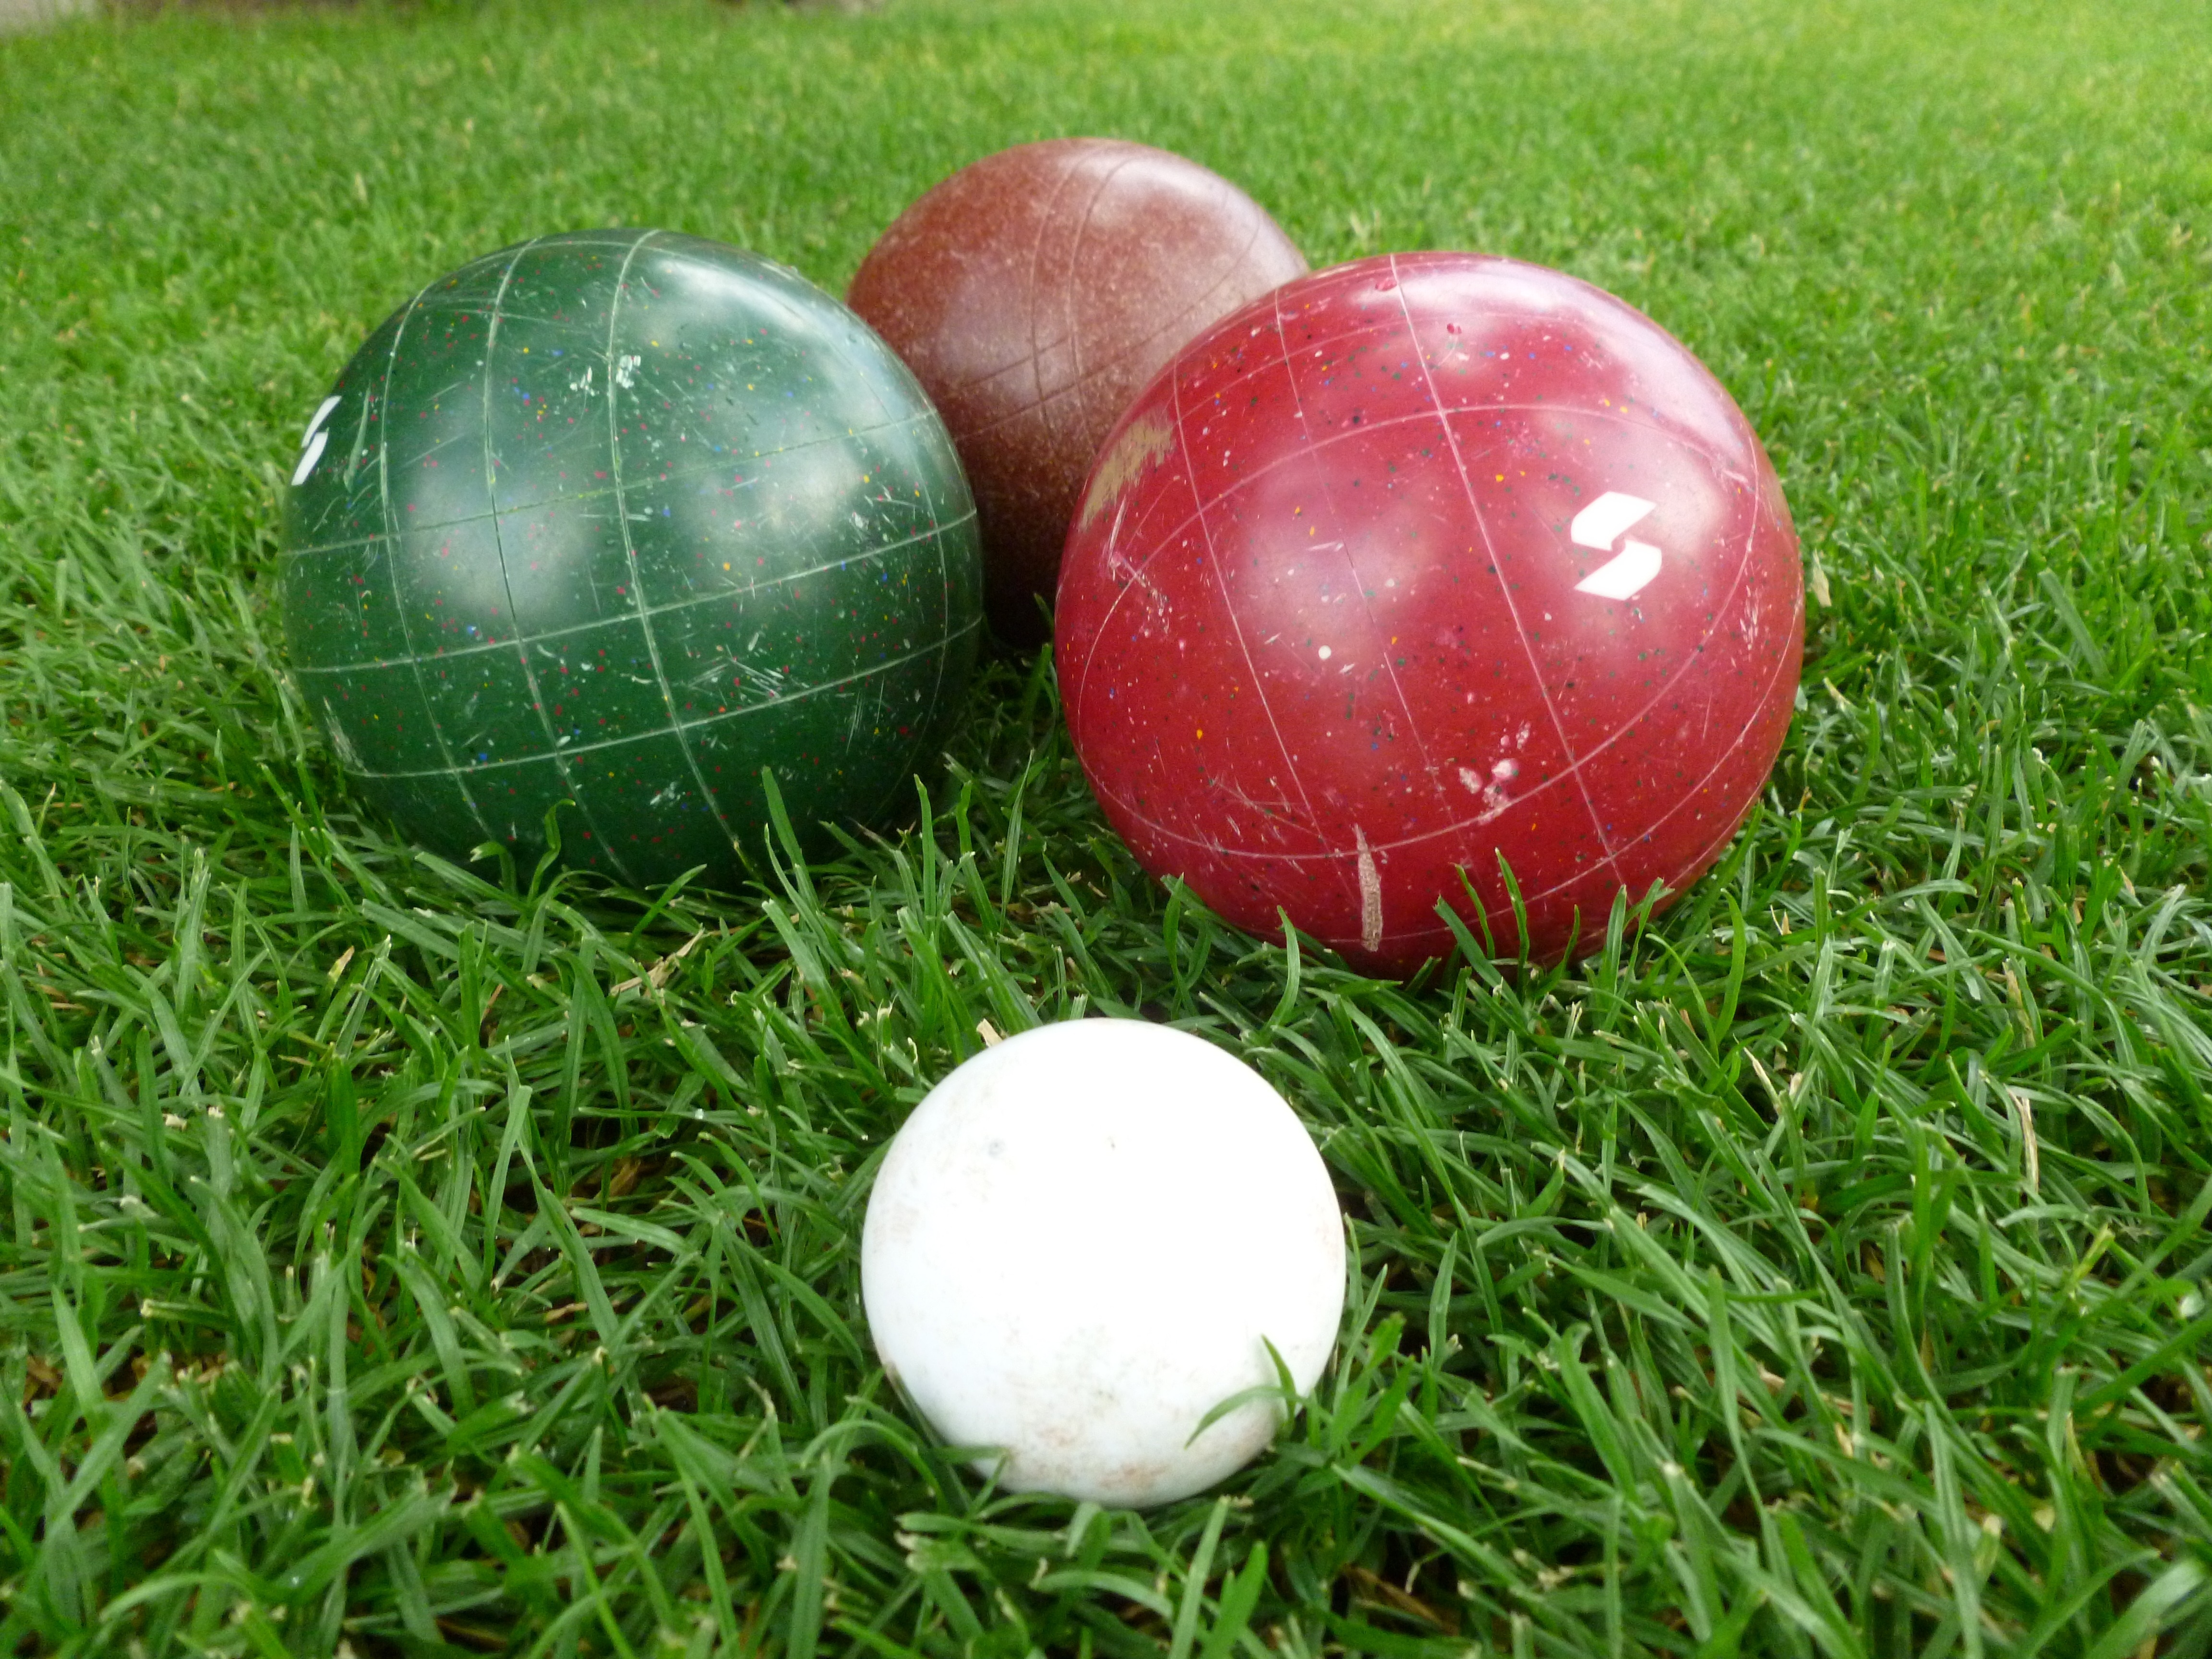 2 red and 1 green balls